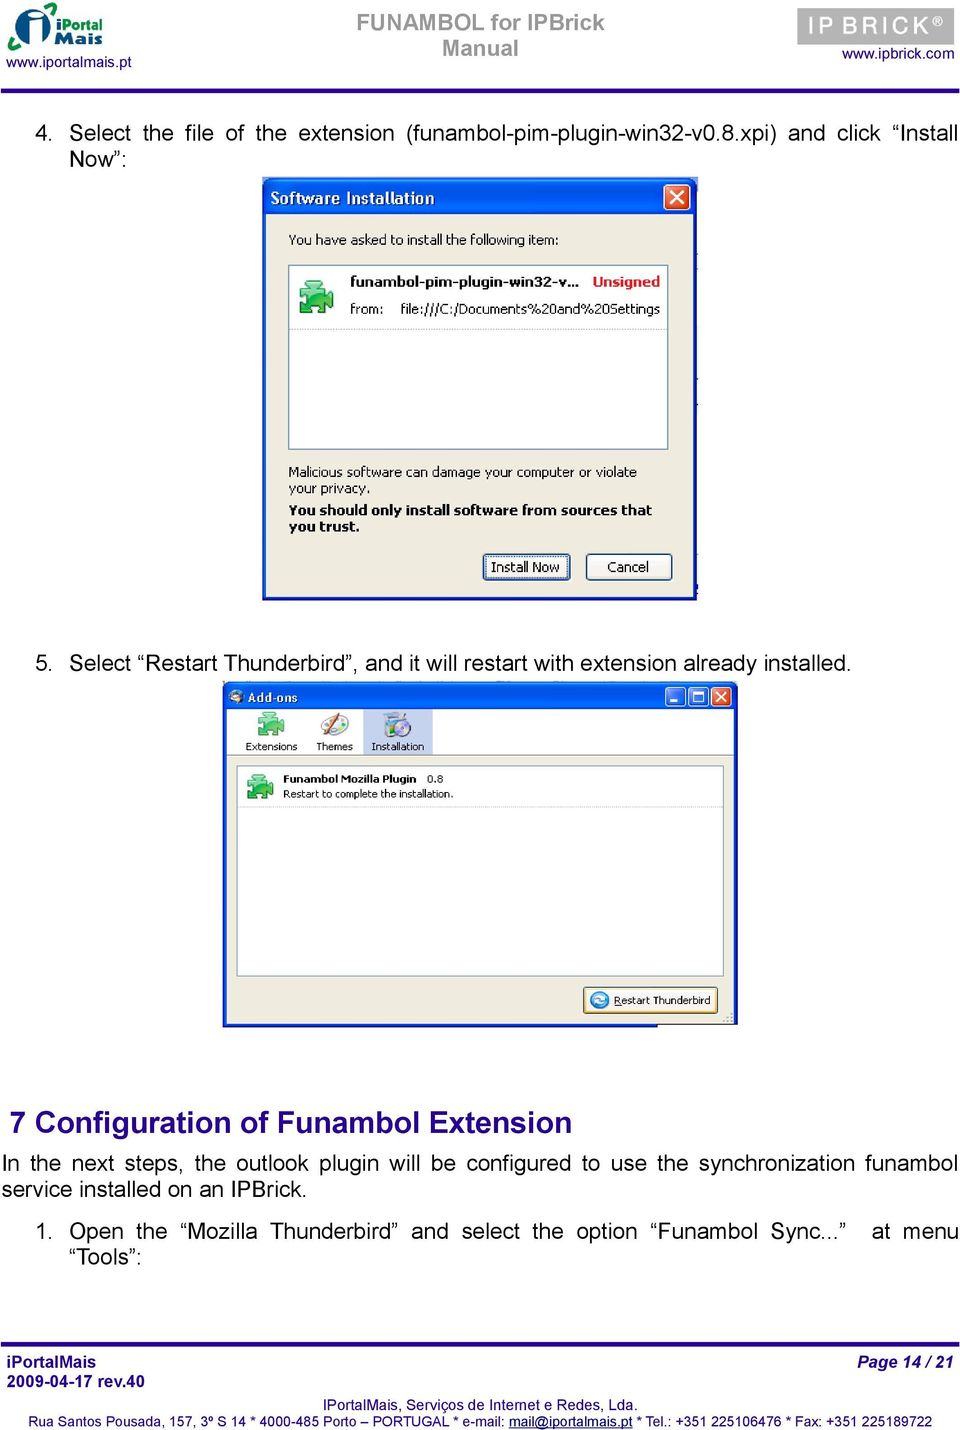 7 Configuration of Funambol Extension In the next steps, the outlook plugin will be configured to use the